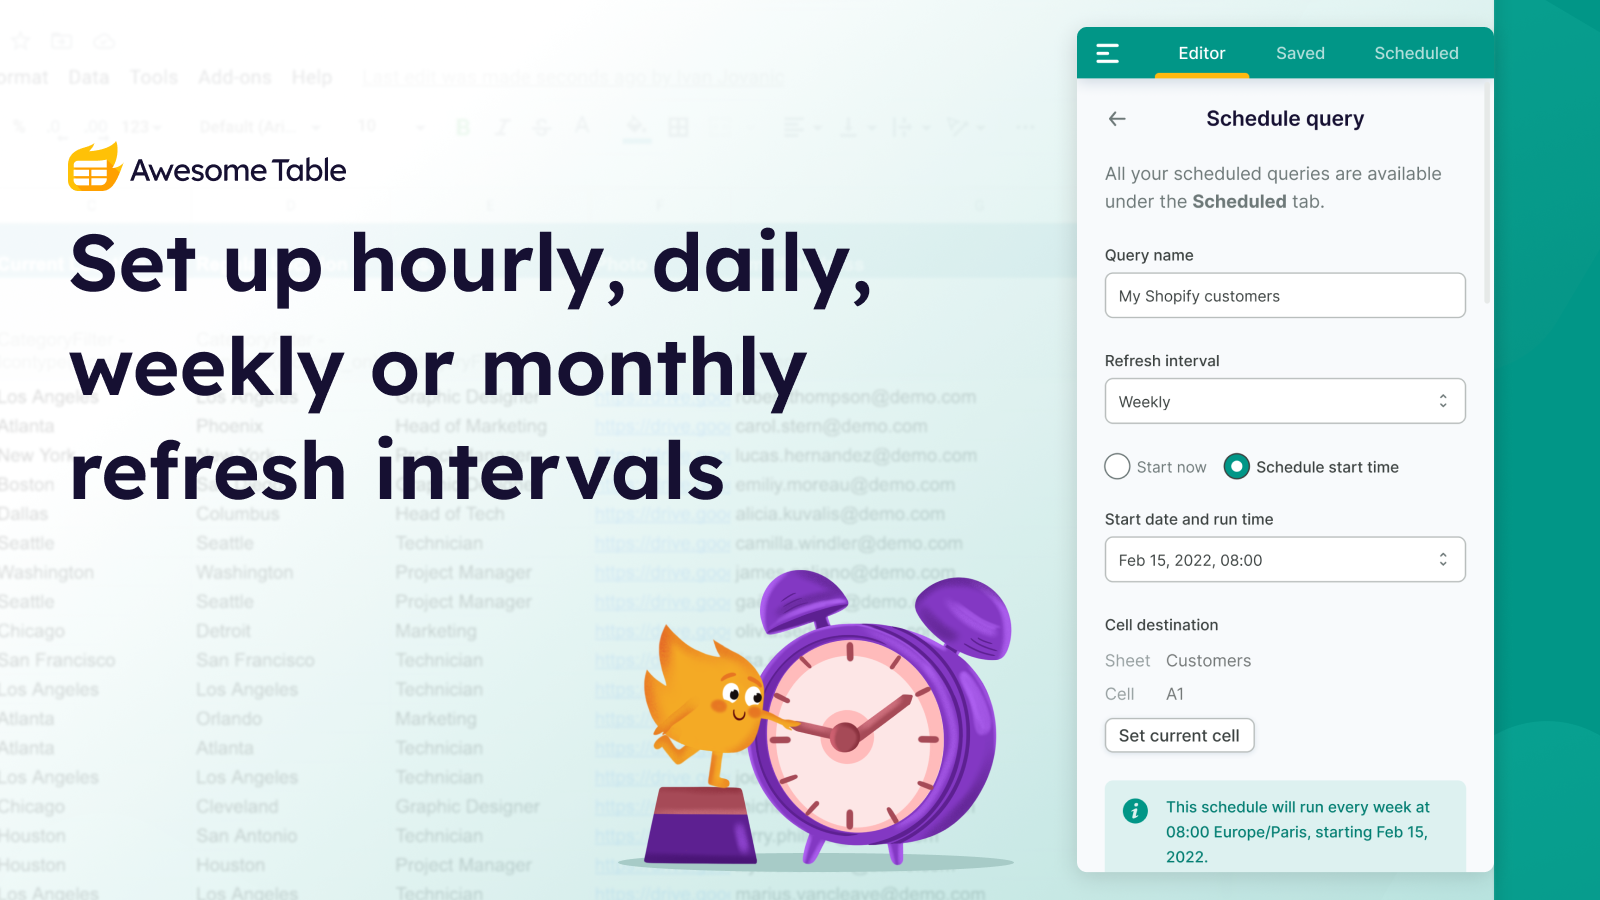 Set up hourly, daily, weekly or monthly refresh intervals